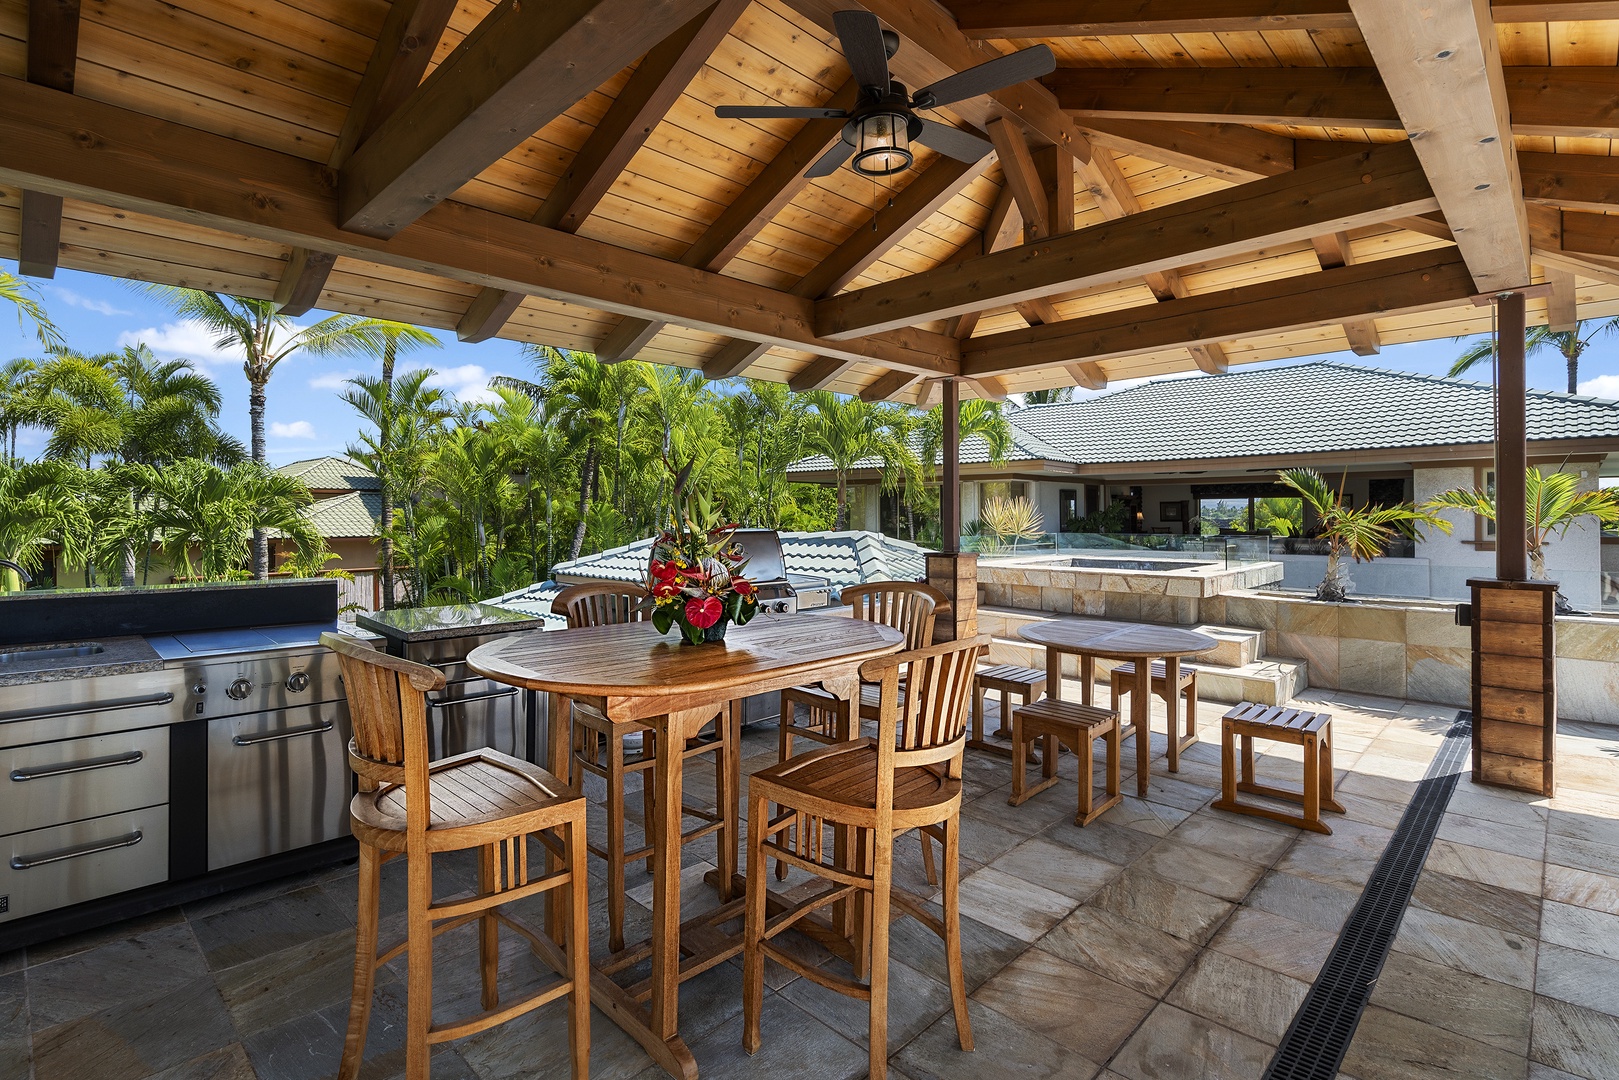 Kamuela Vacation Rentals, Champion Ridge #35 - Spacious covered outdoor seating area